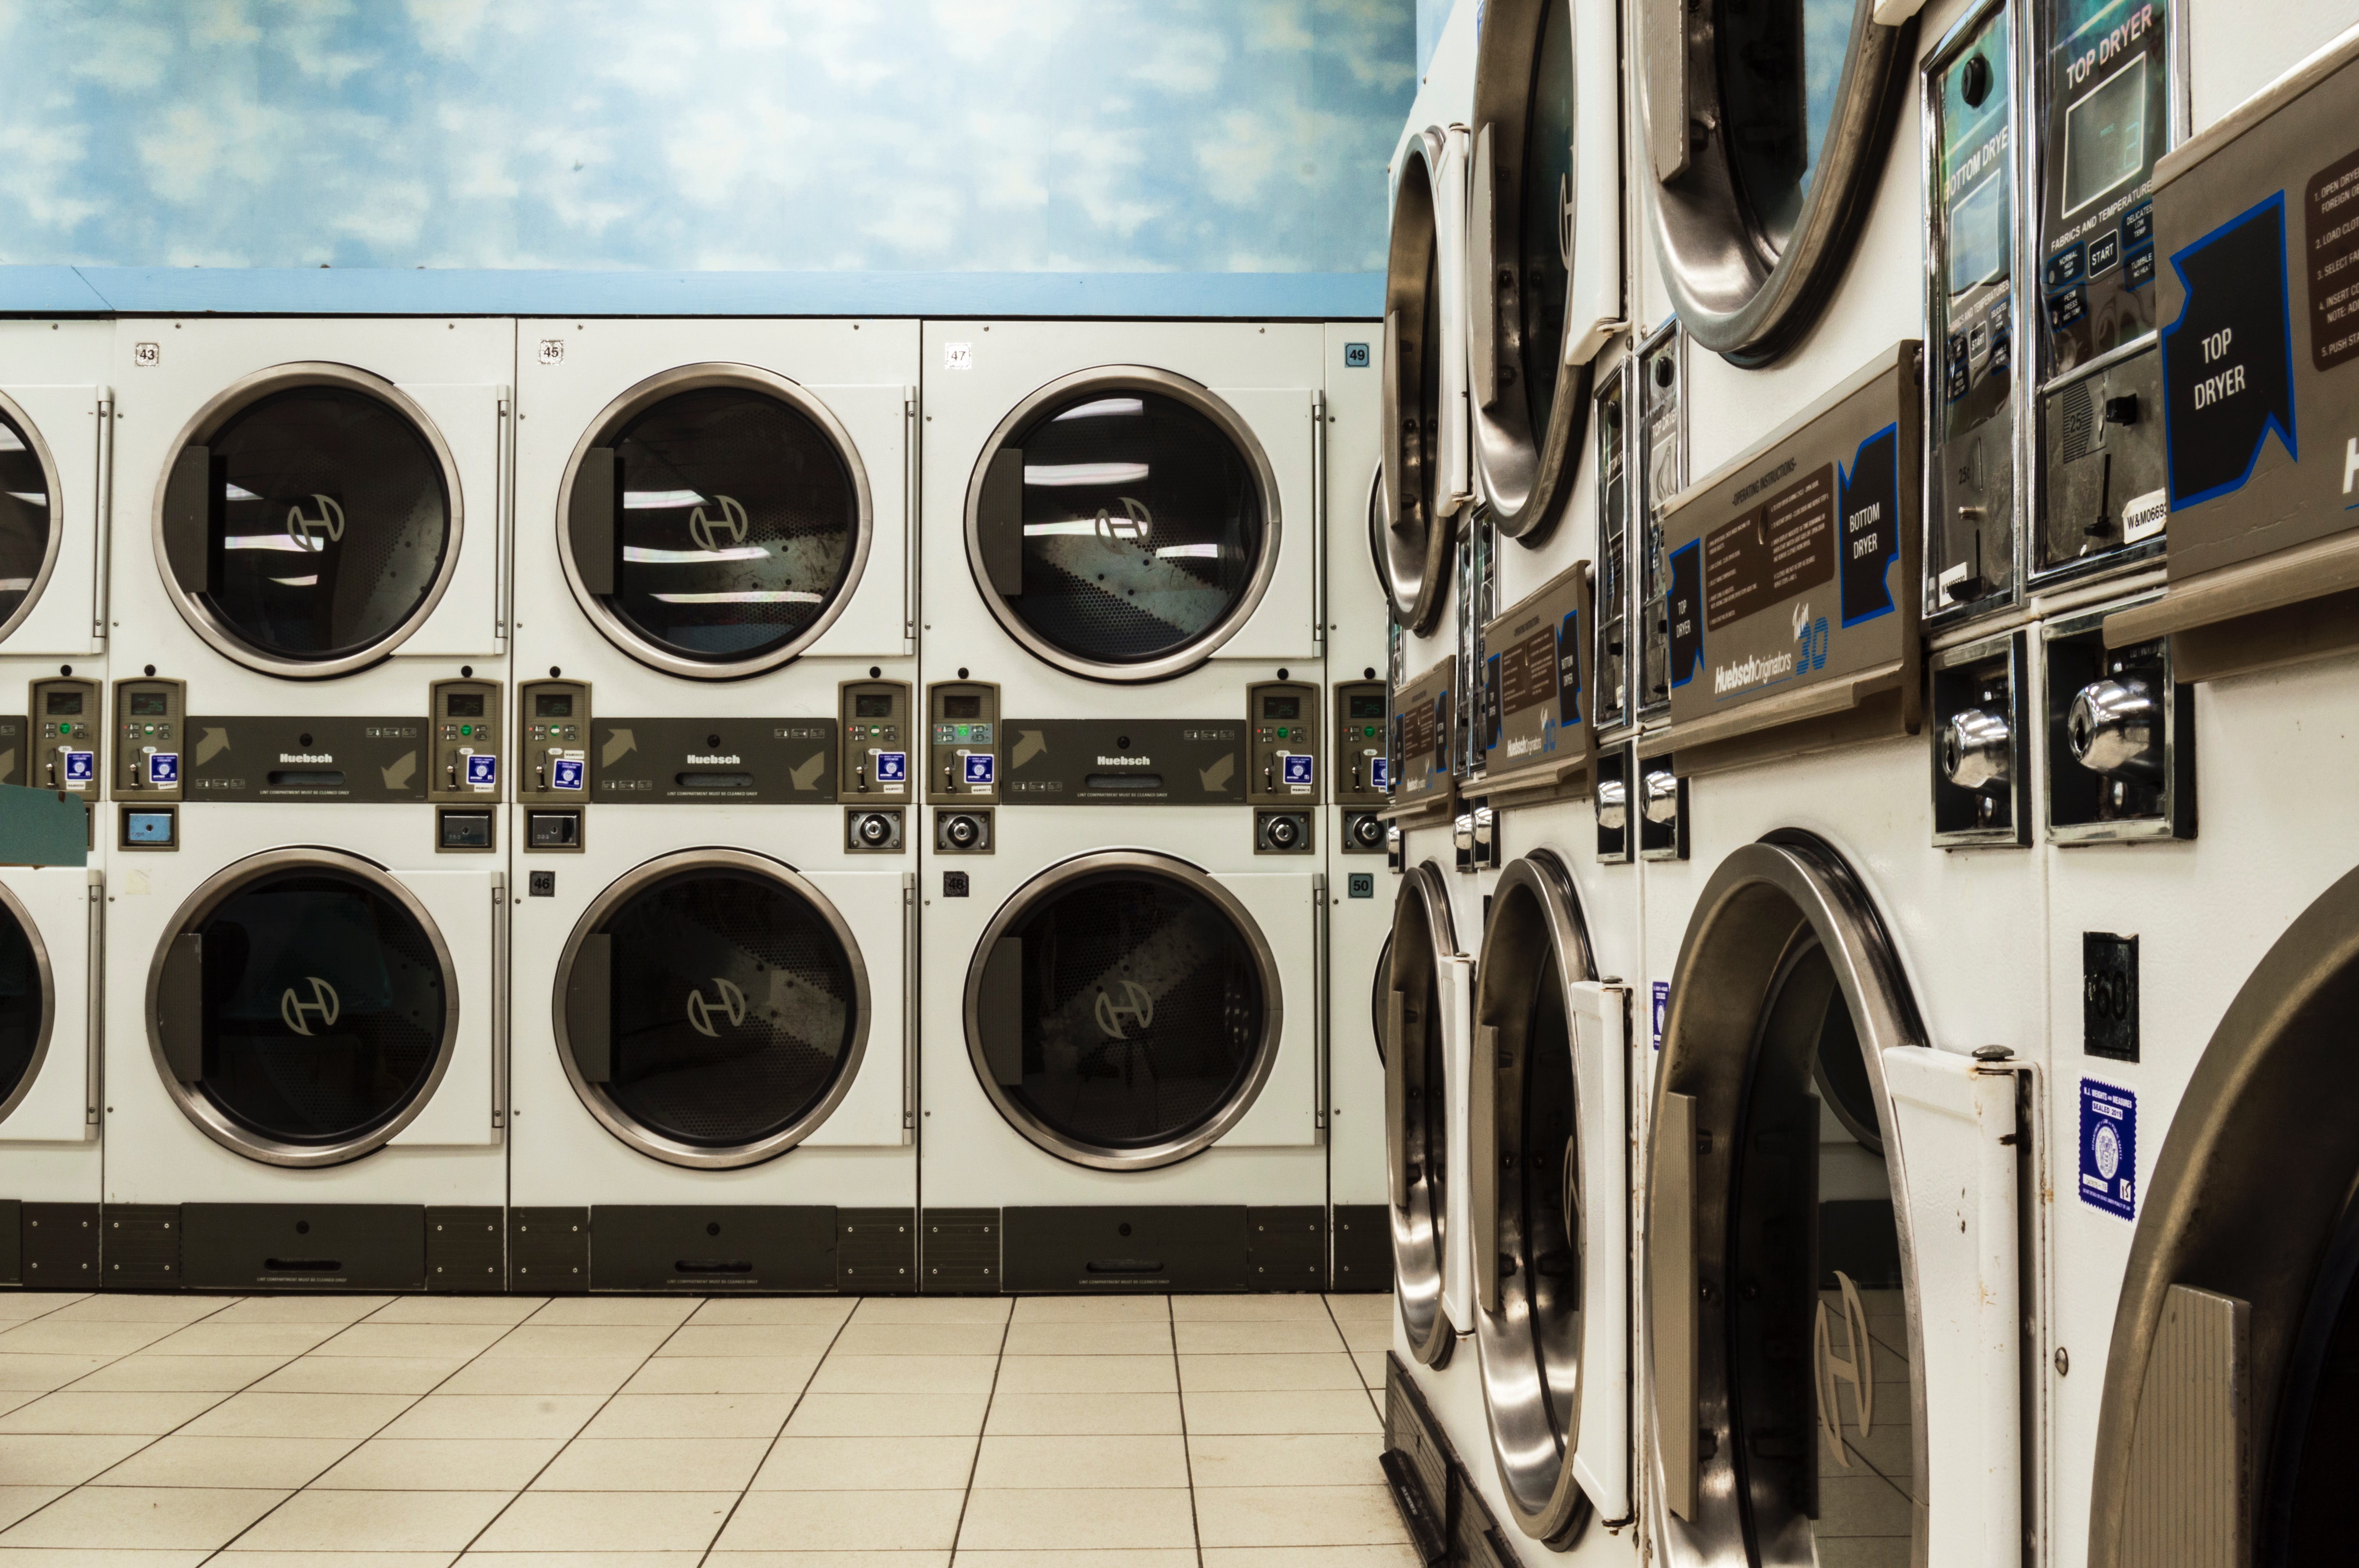 How To Find The Best And Cheap Laundromat Near Me